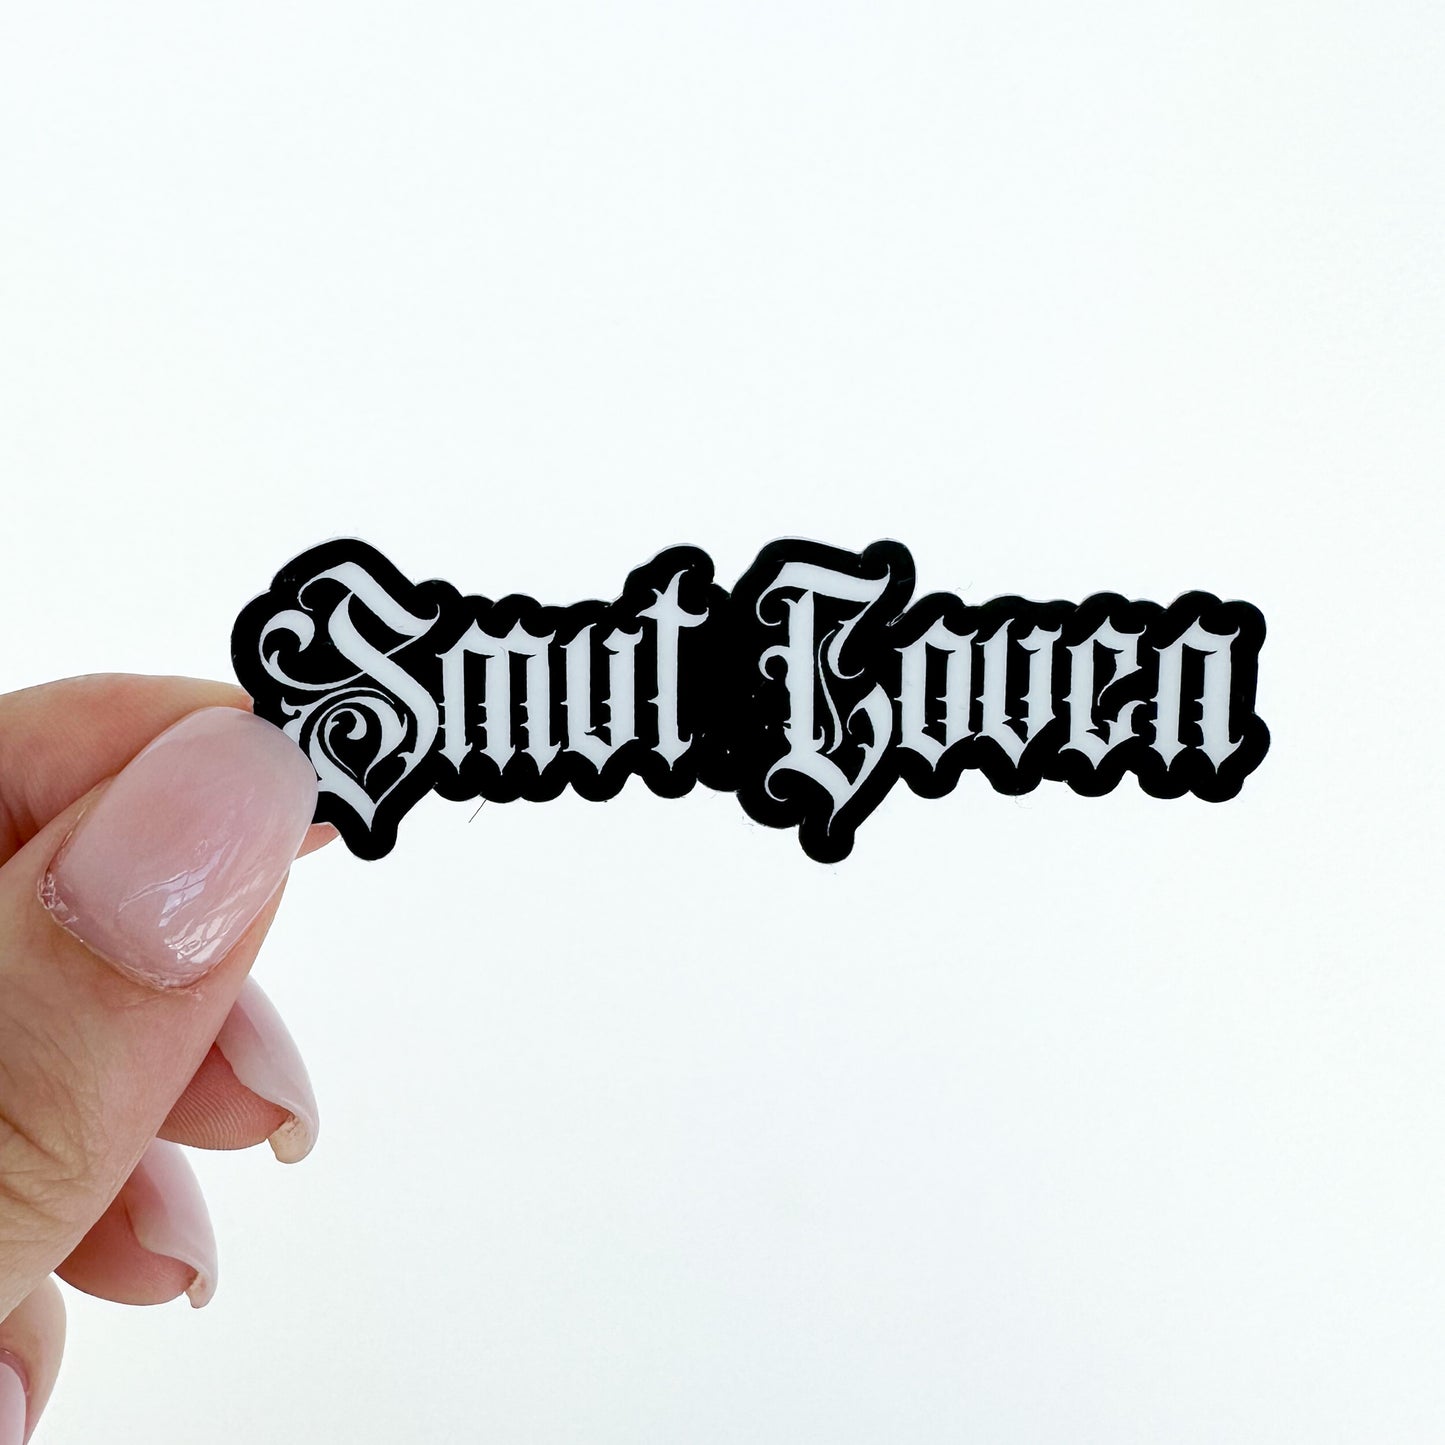 smut coven sticker